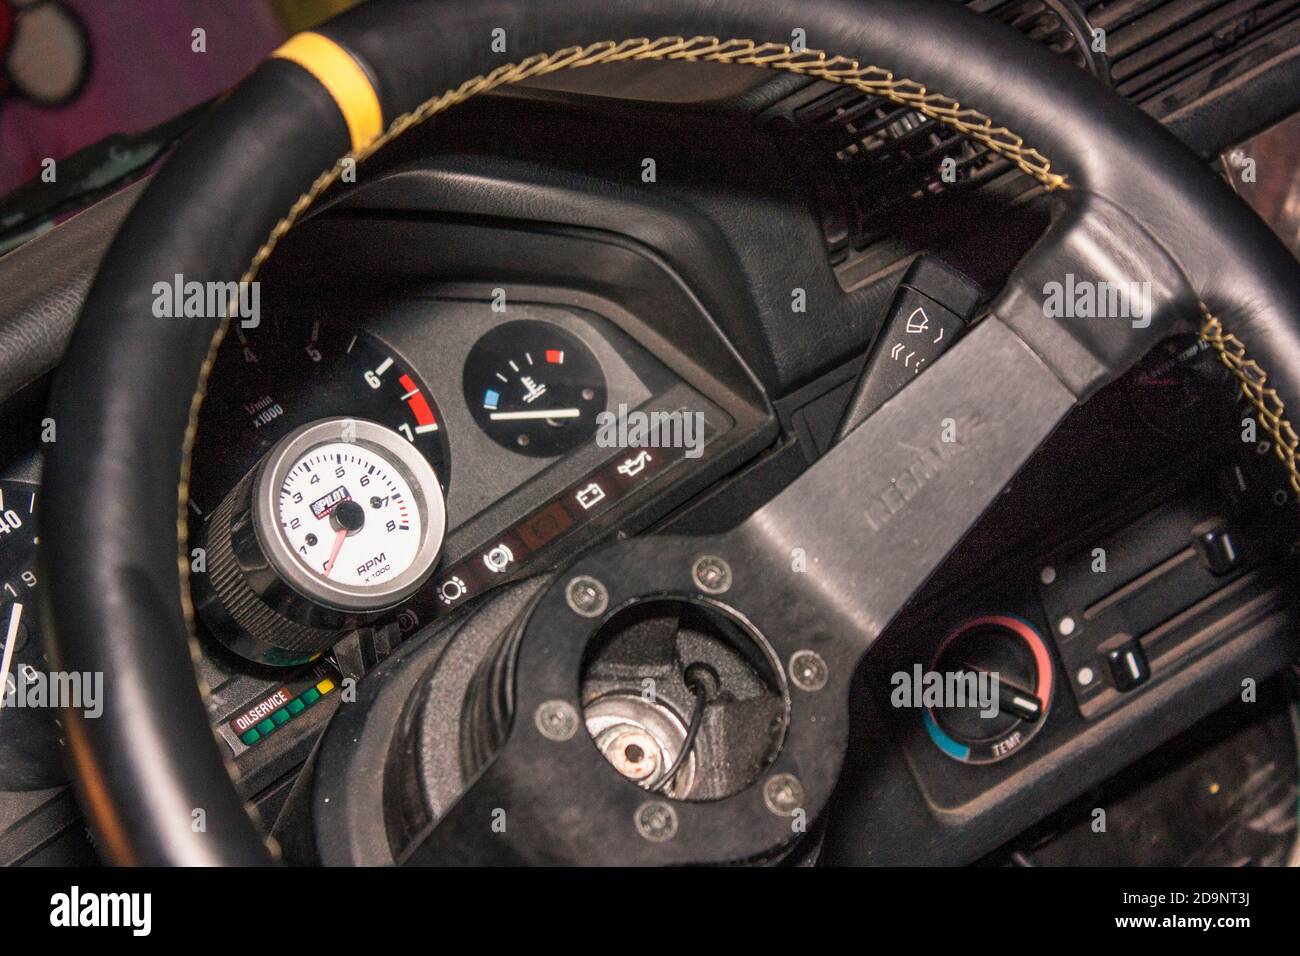 ADRIA, ITALY 24 MARCH 2020: Dashboard of a Drifting car with steering wheel detail Stock Photo